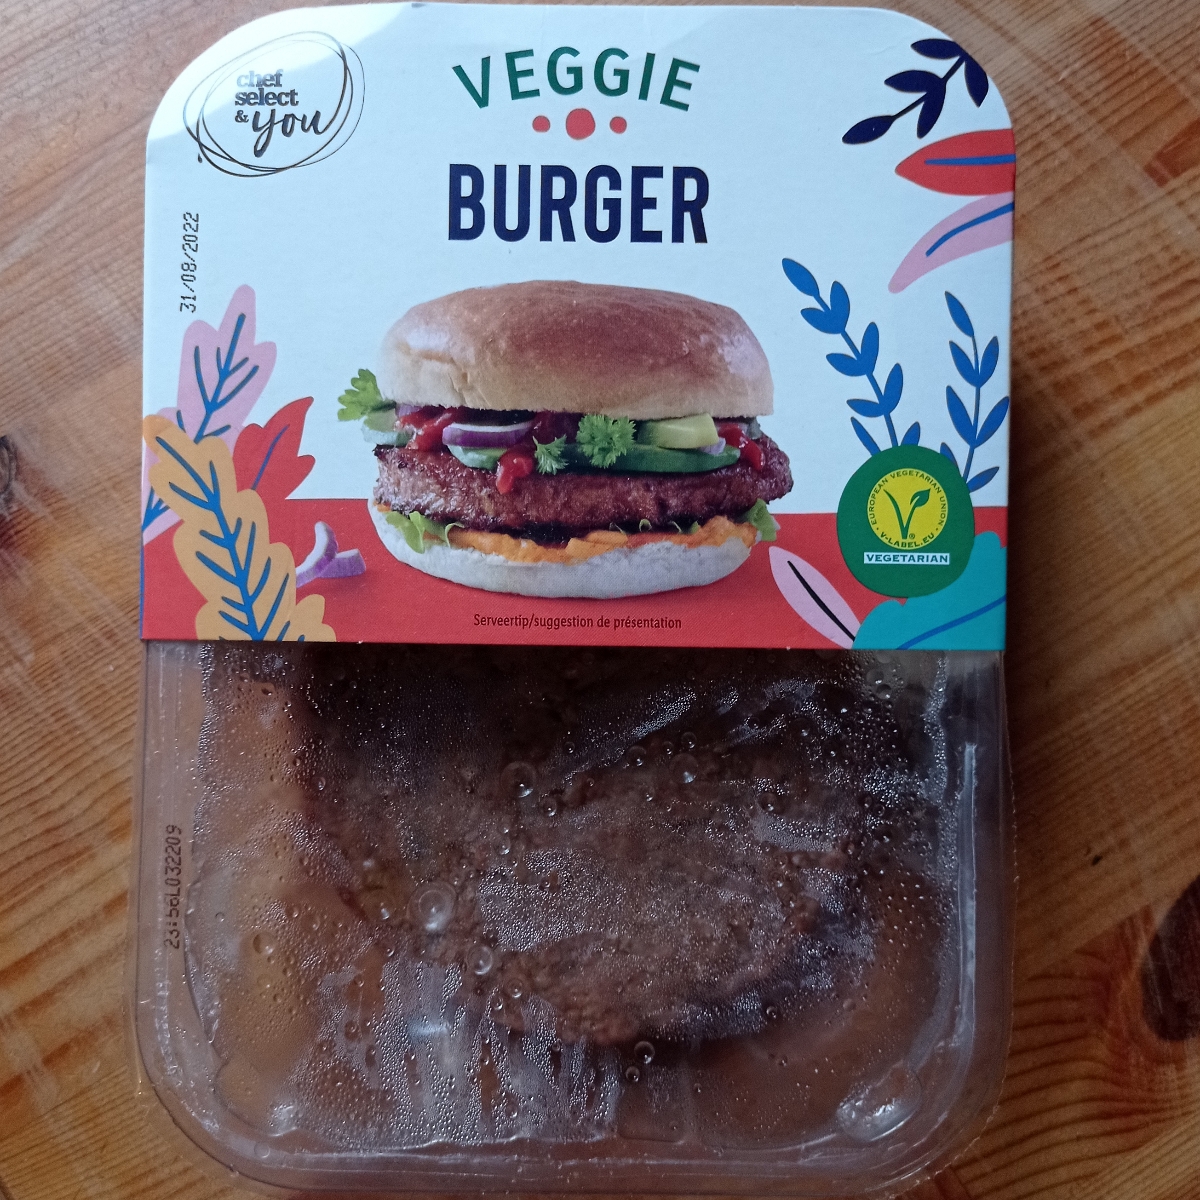 Chef select and you veggie Reviews abillion burger 